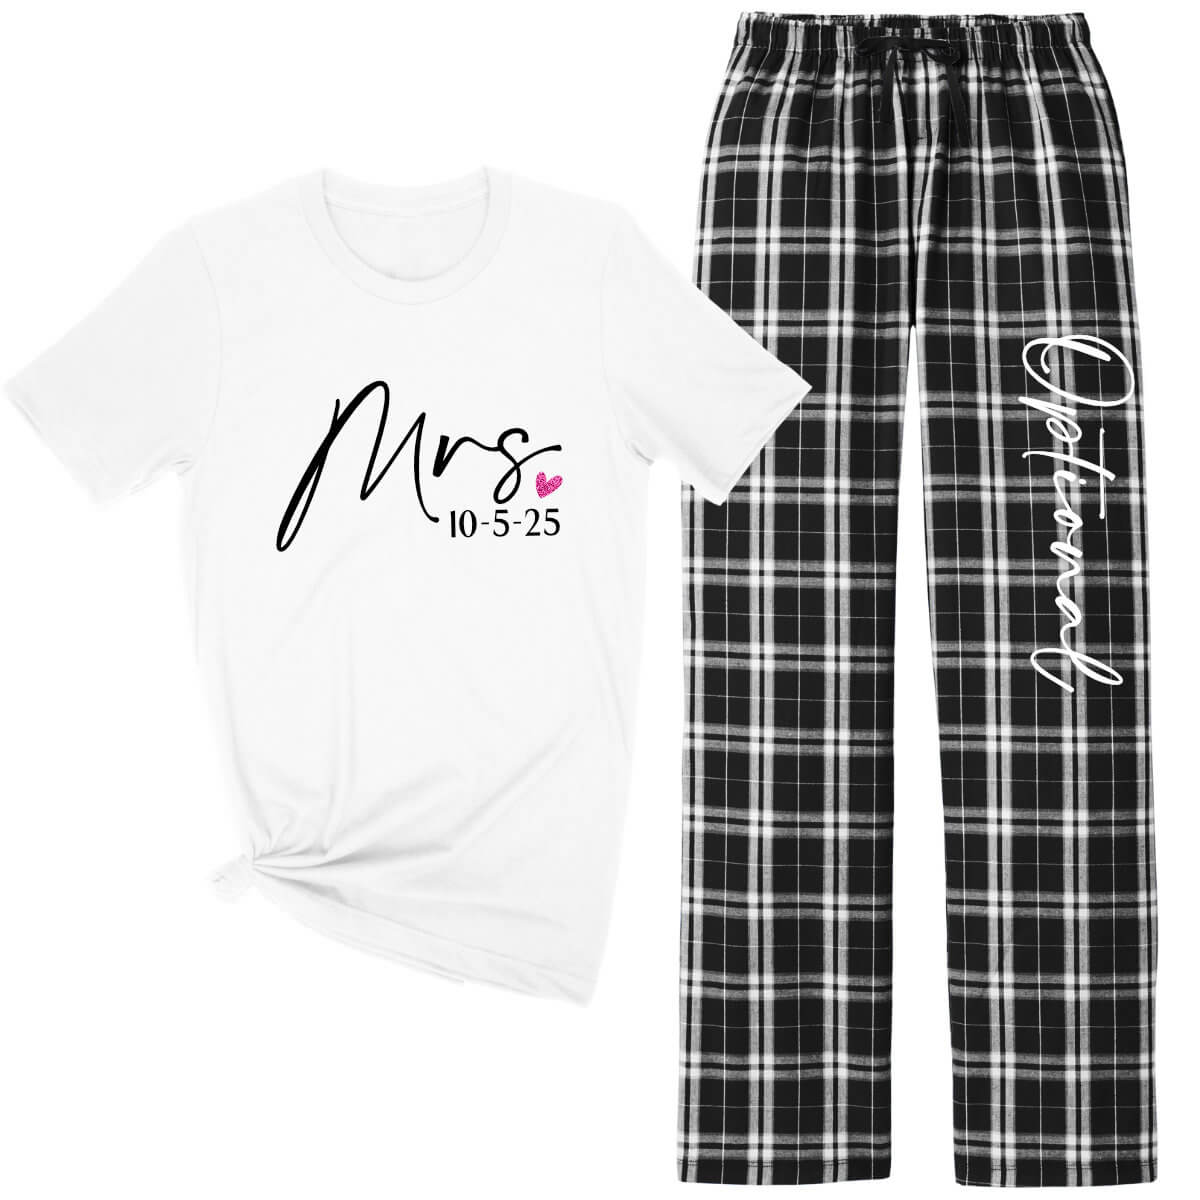 "Mrs." Flannel Pants Set with Date